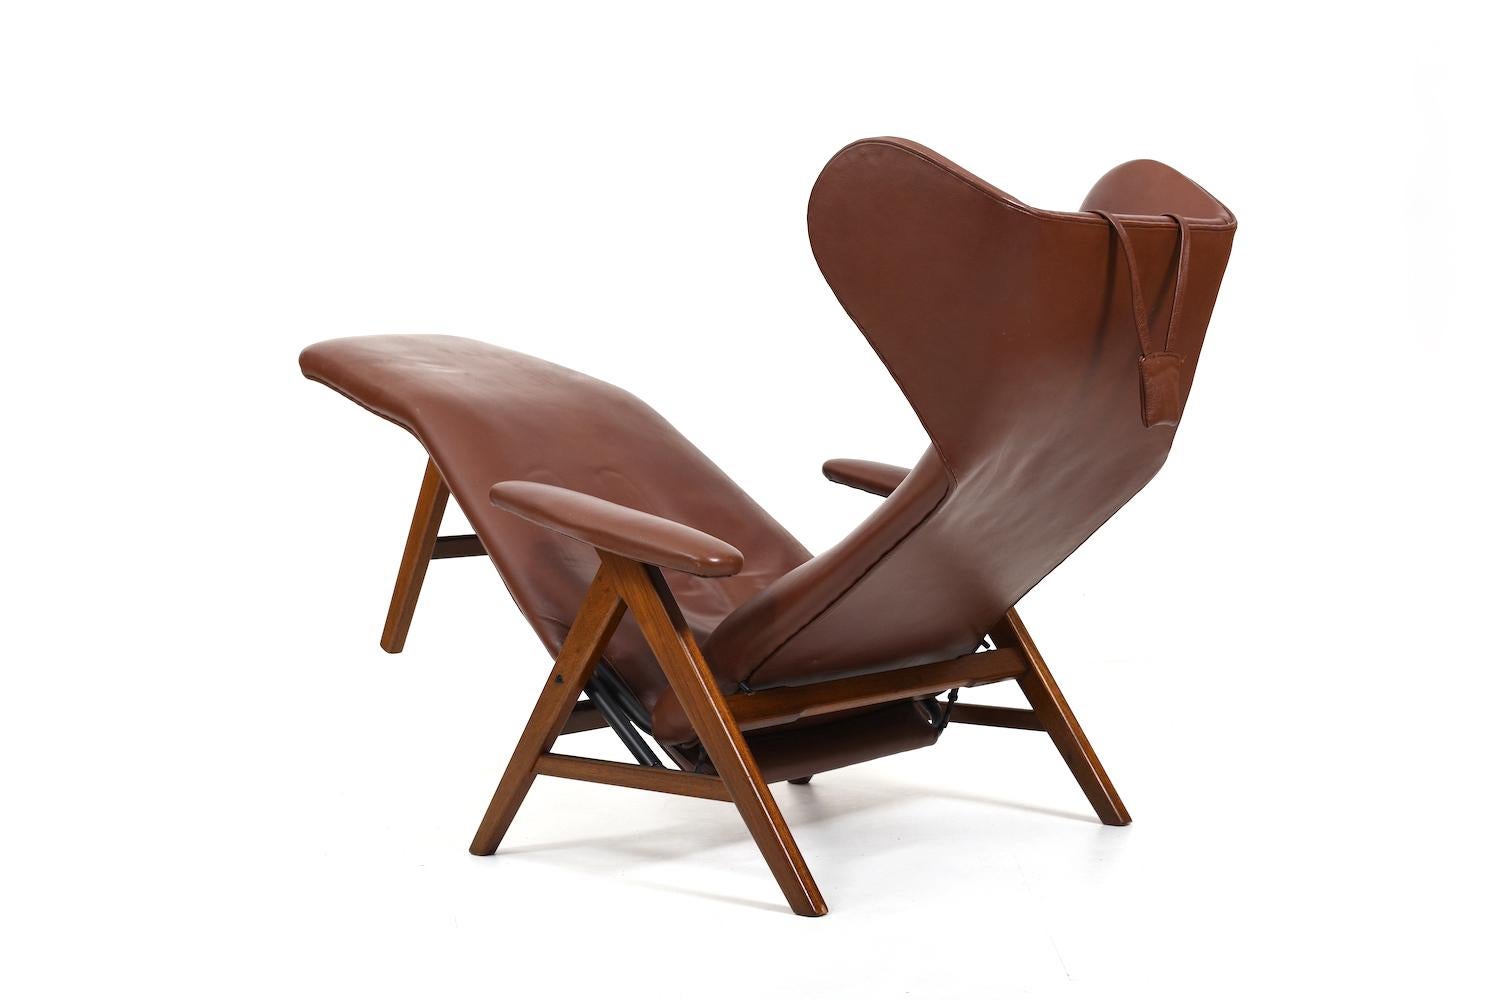 20th Century Teak Lounge Chair by Henry W. Klein for Bramin 1950s